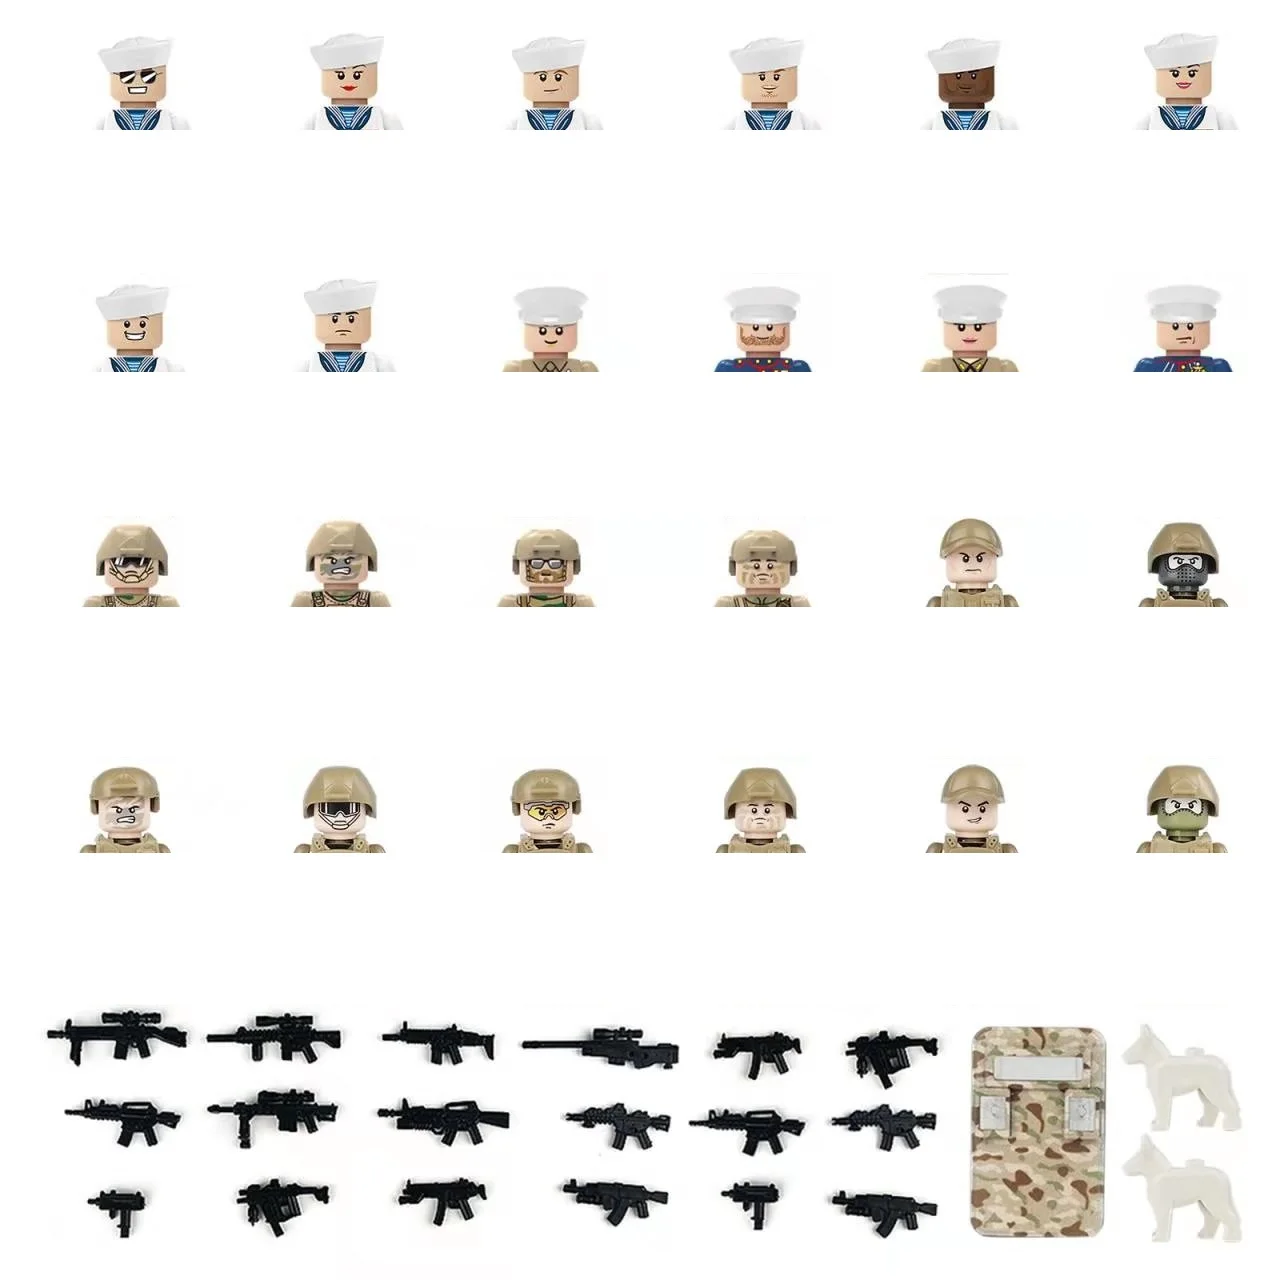 

MOC Military Weapon Specia Force Army 24pcs Soldiers Minifigs Figures Accessories Building Blocks Mini Figurine Toys Kid Gifts